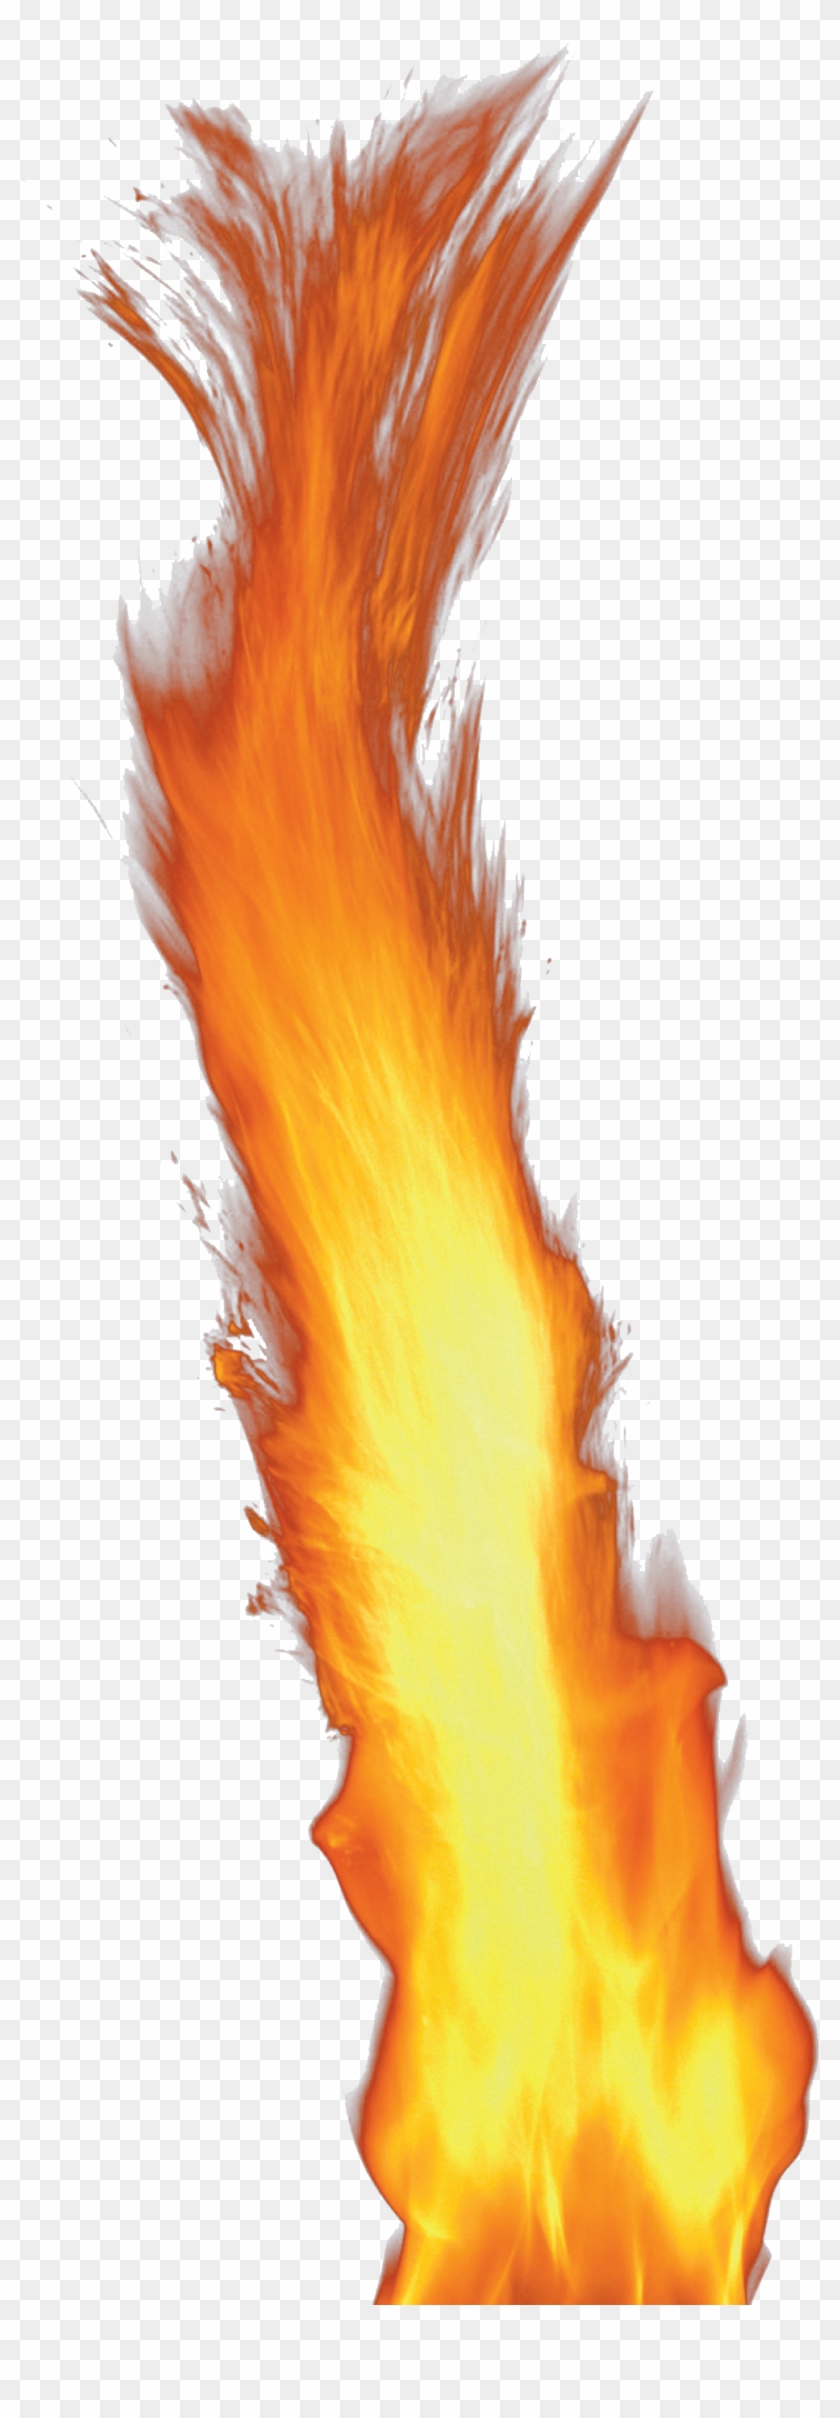 Download Free Transparent Png Image - Flame .png #396825